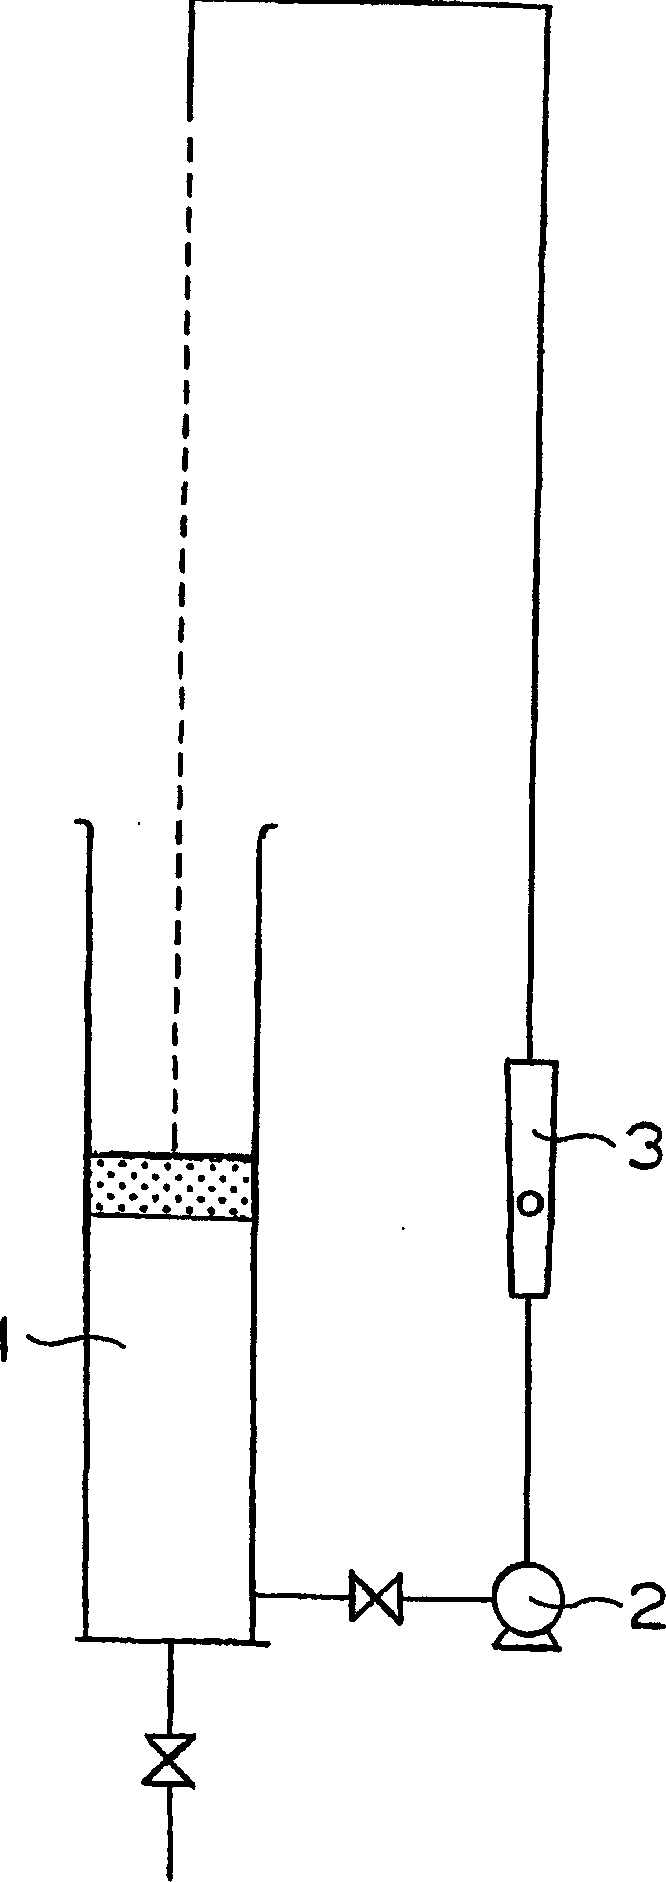 Defoaming agent composition for oil in water type emulsion